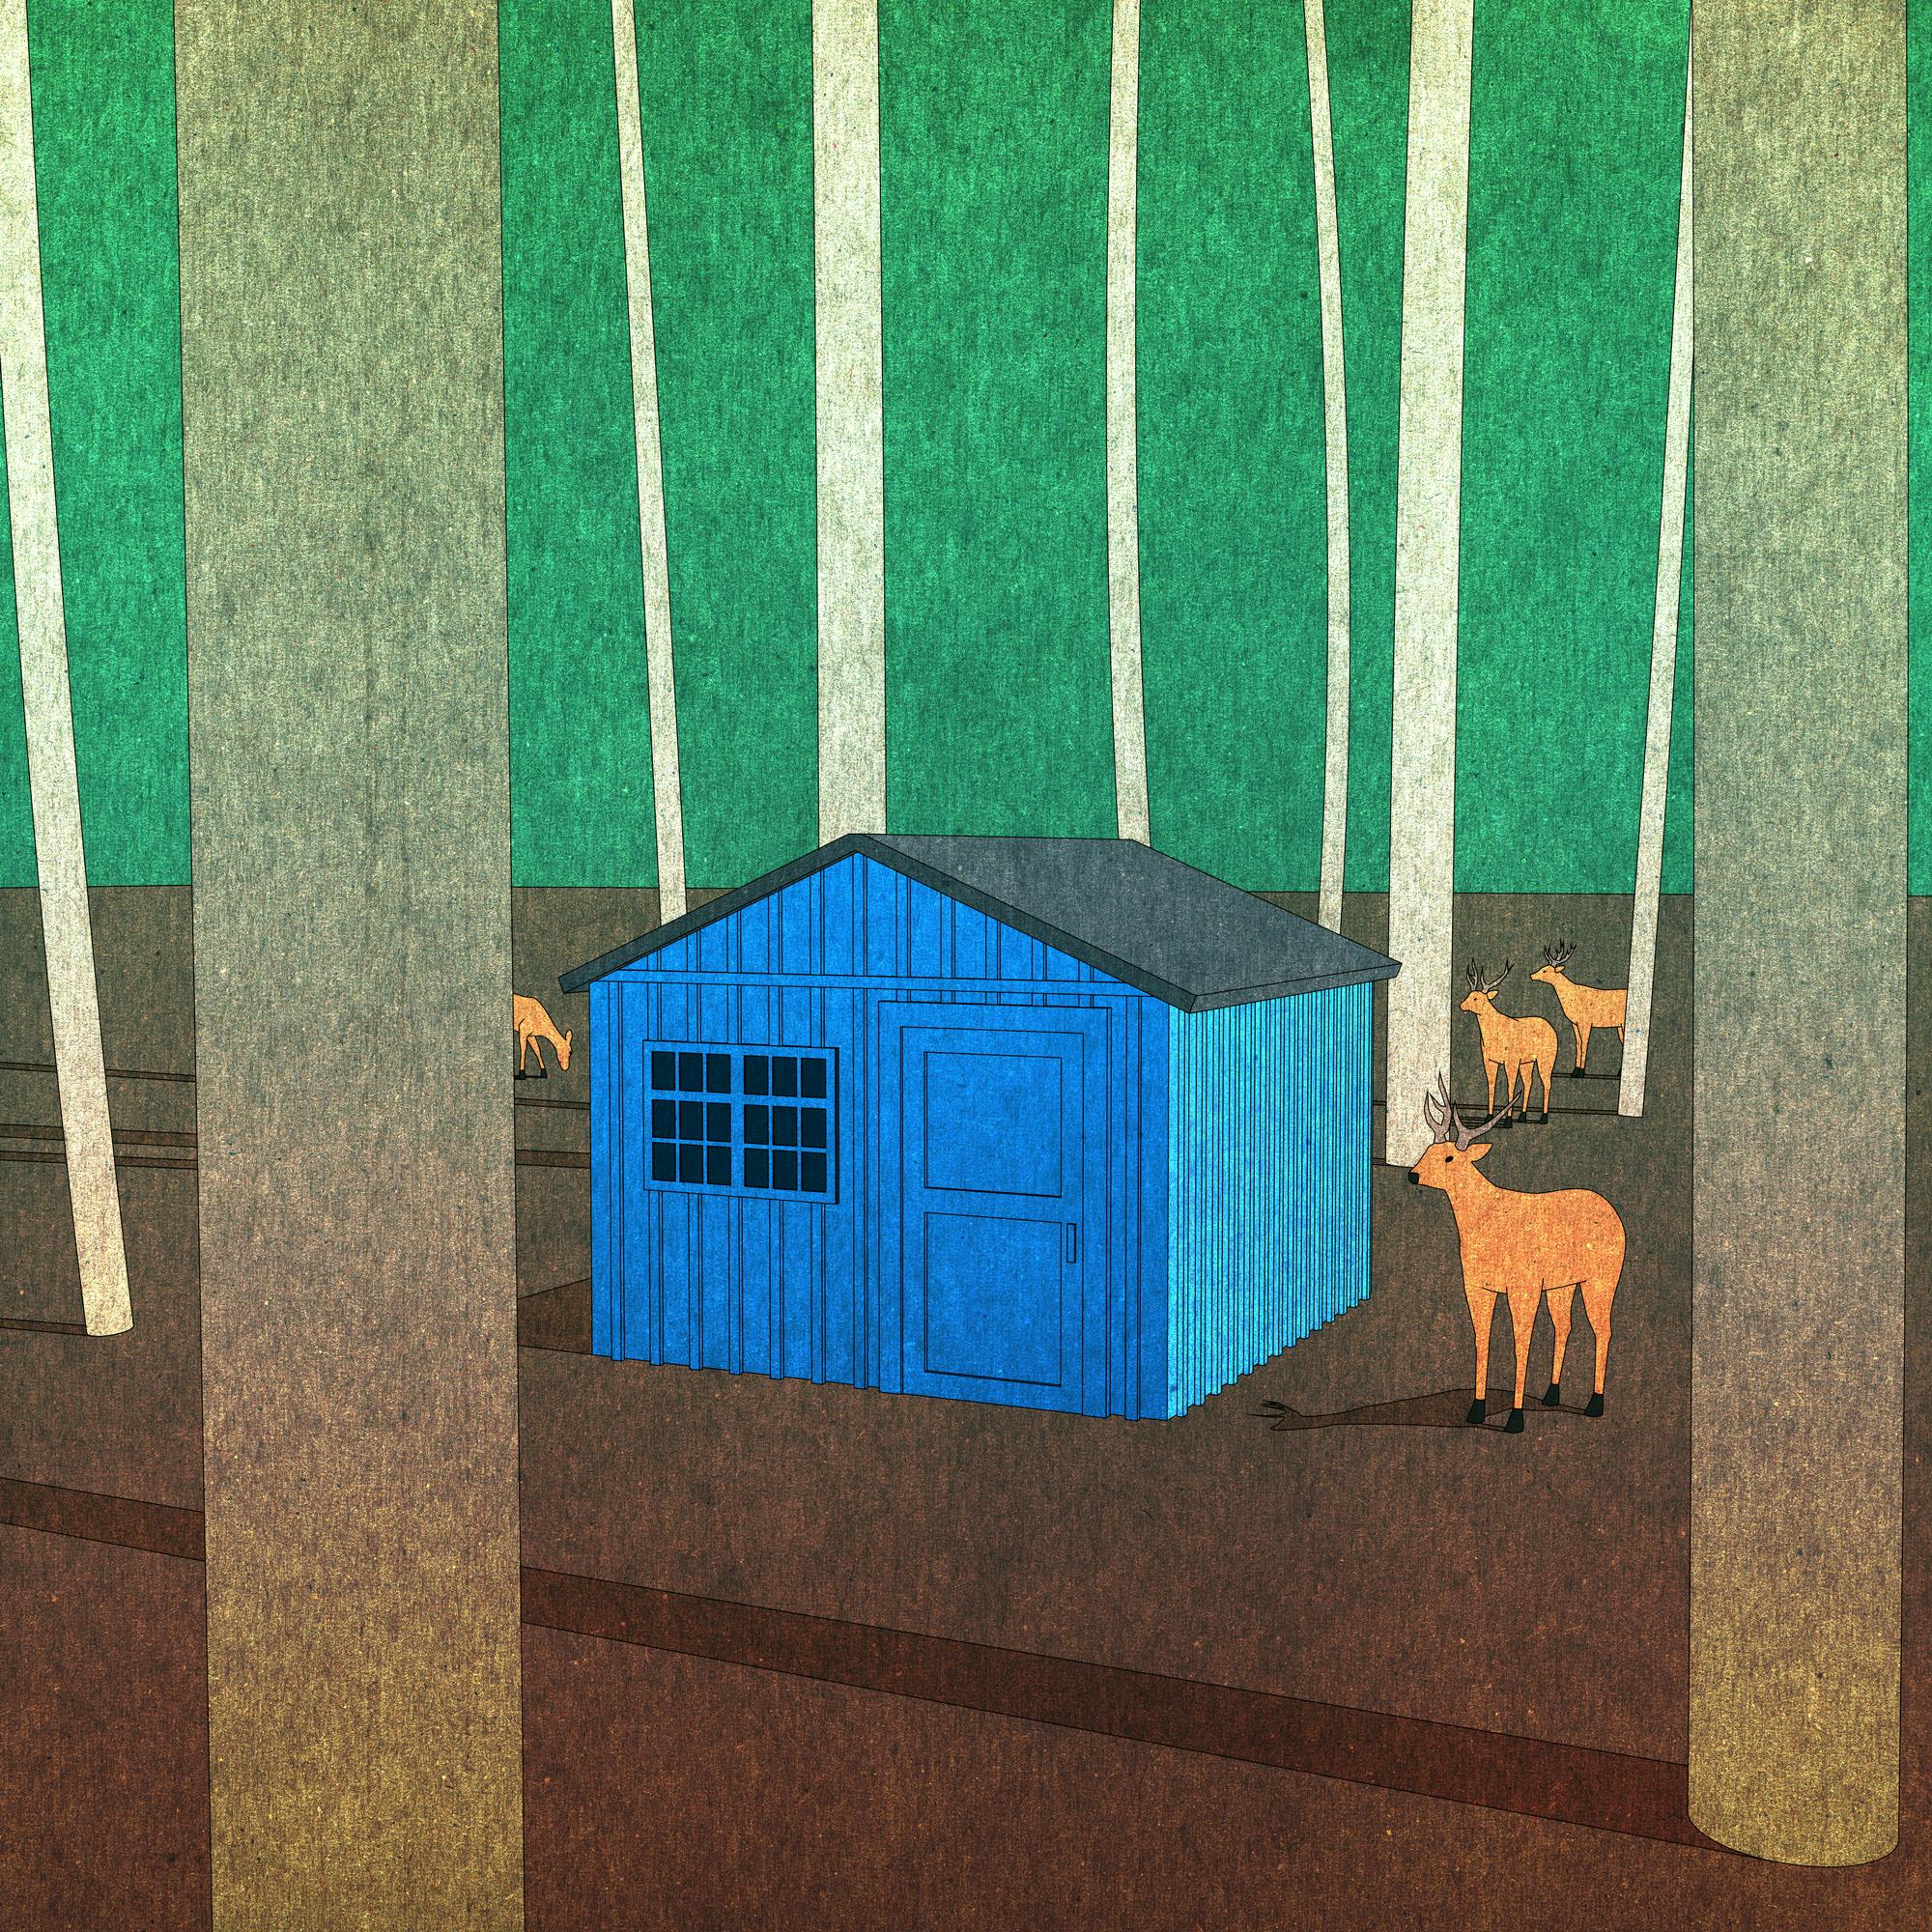 A blue shed in the woods surrounded by a few deer.